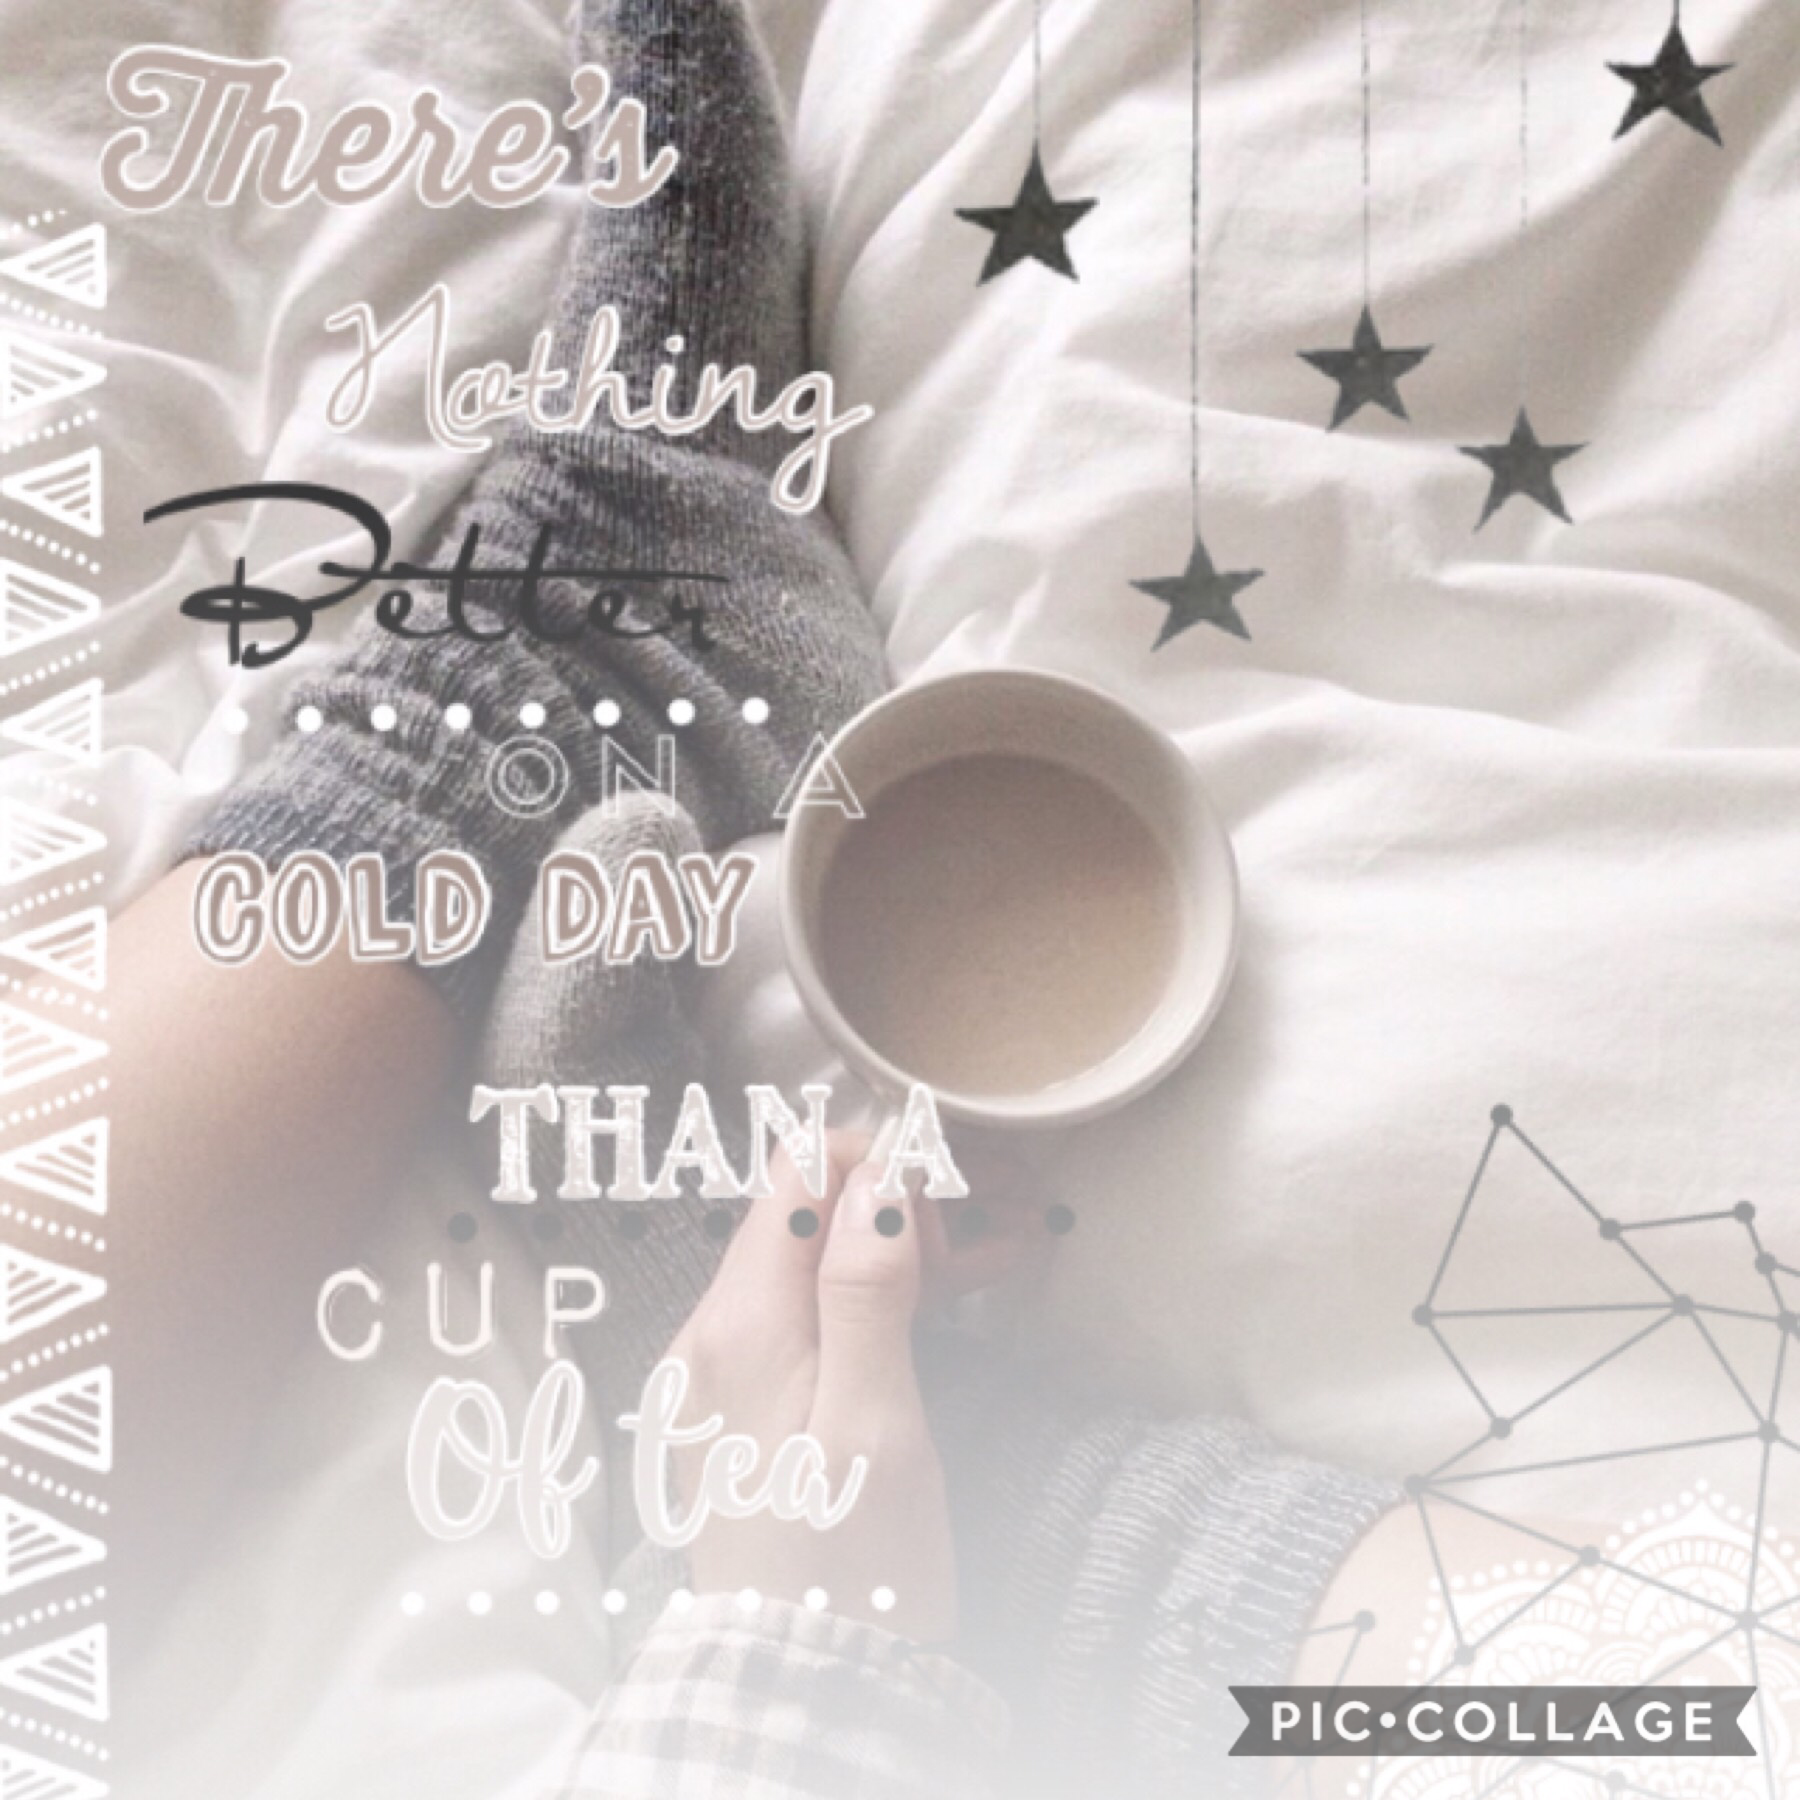 ☕️ Tap ☕️ 
Hey guys! So sorry I haven’t been active lately and posting a lot. Here is a collage to get into the upcoming cold weather!